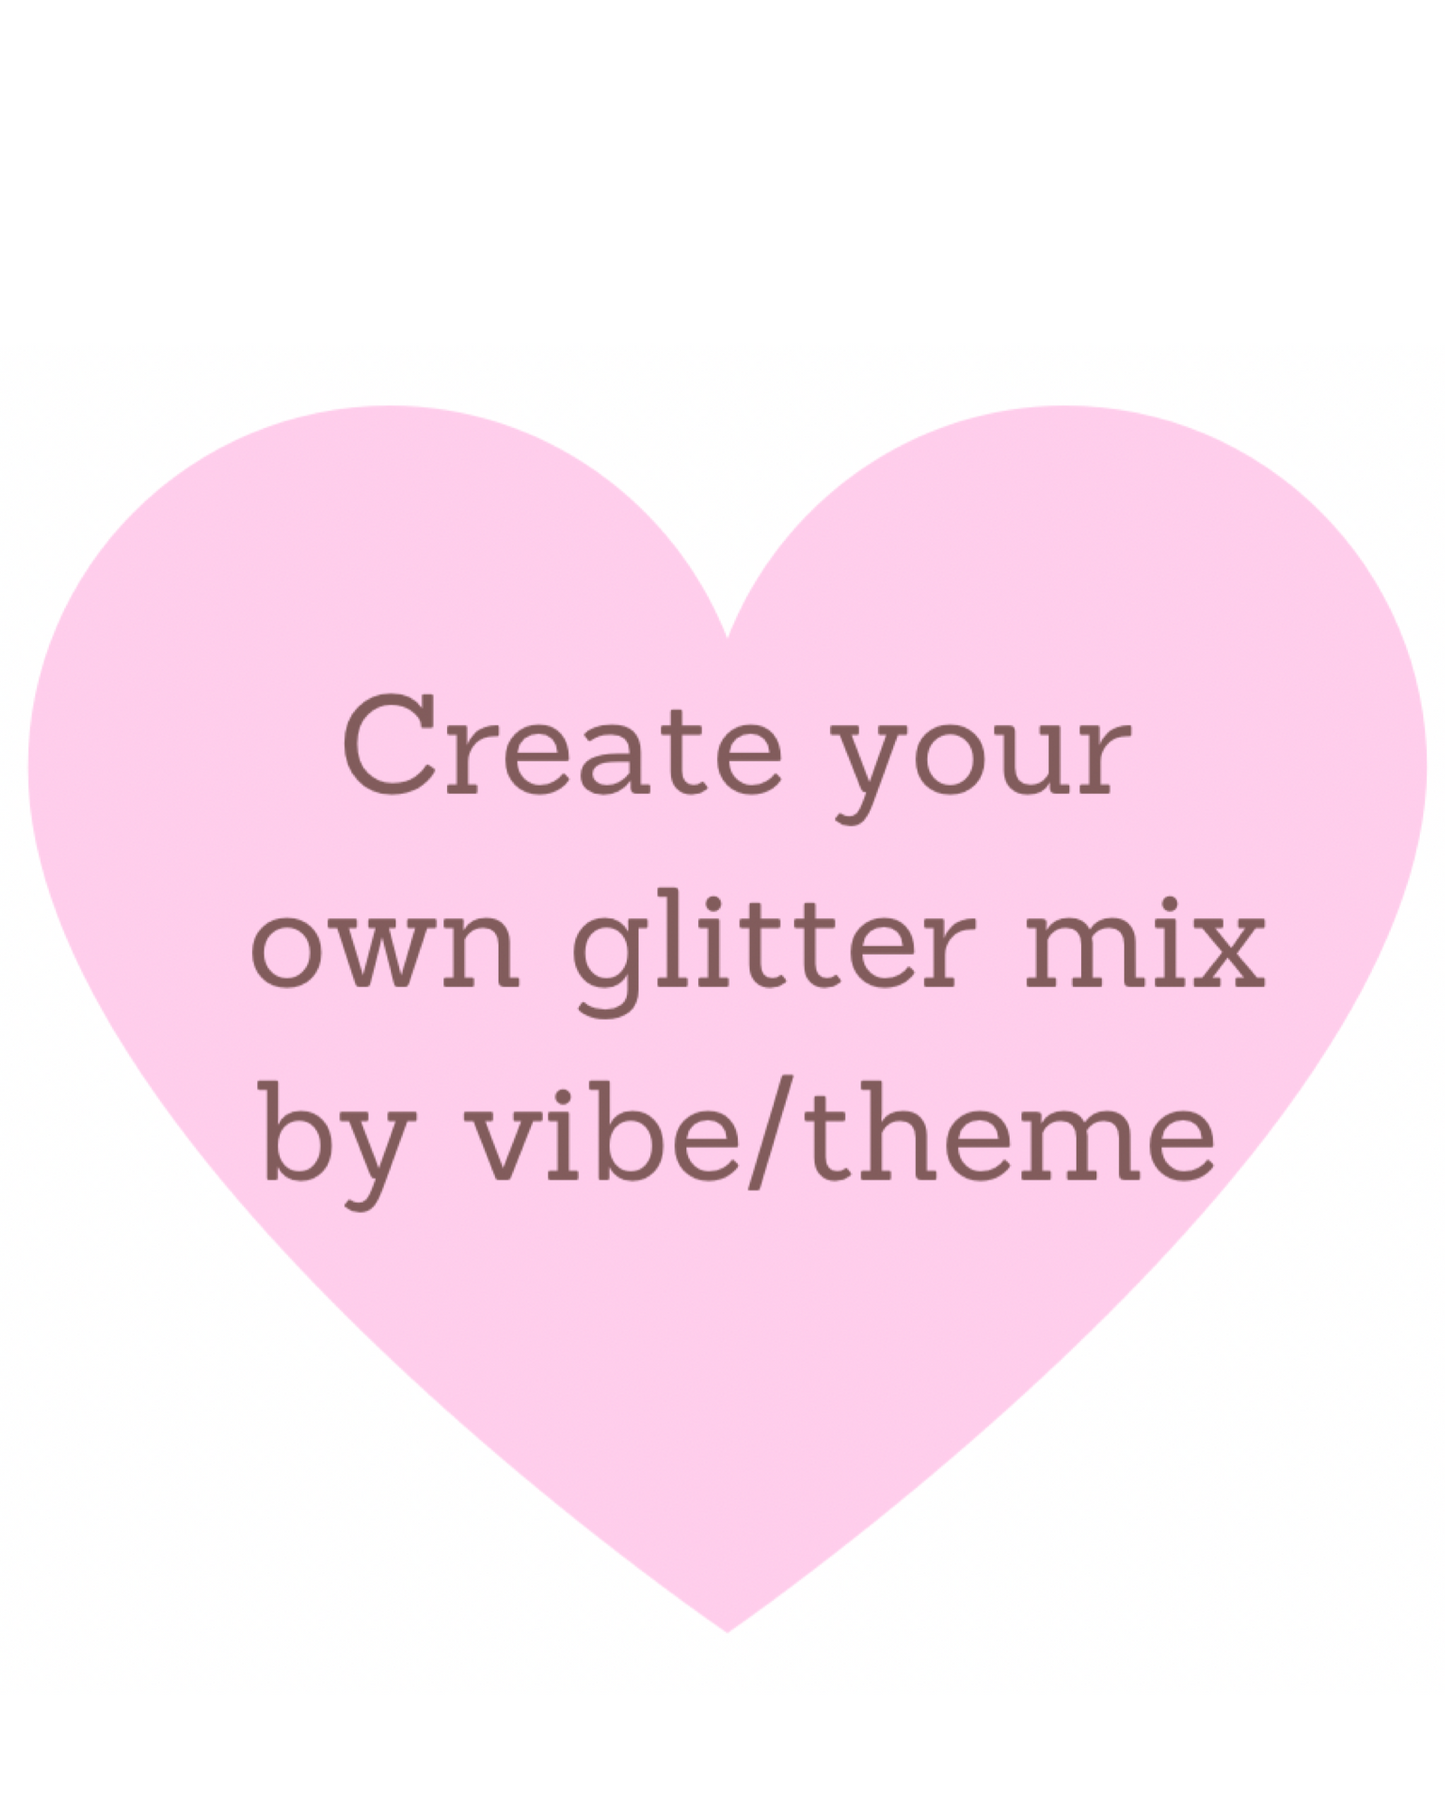 Create your own glitter mix by vibe/theme